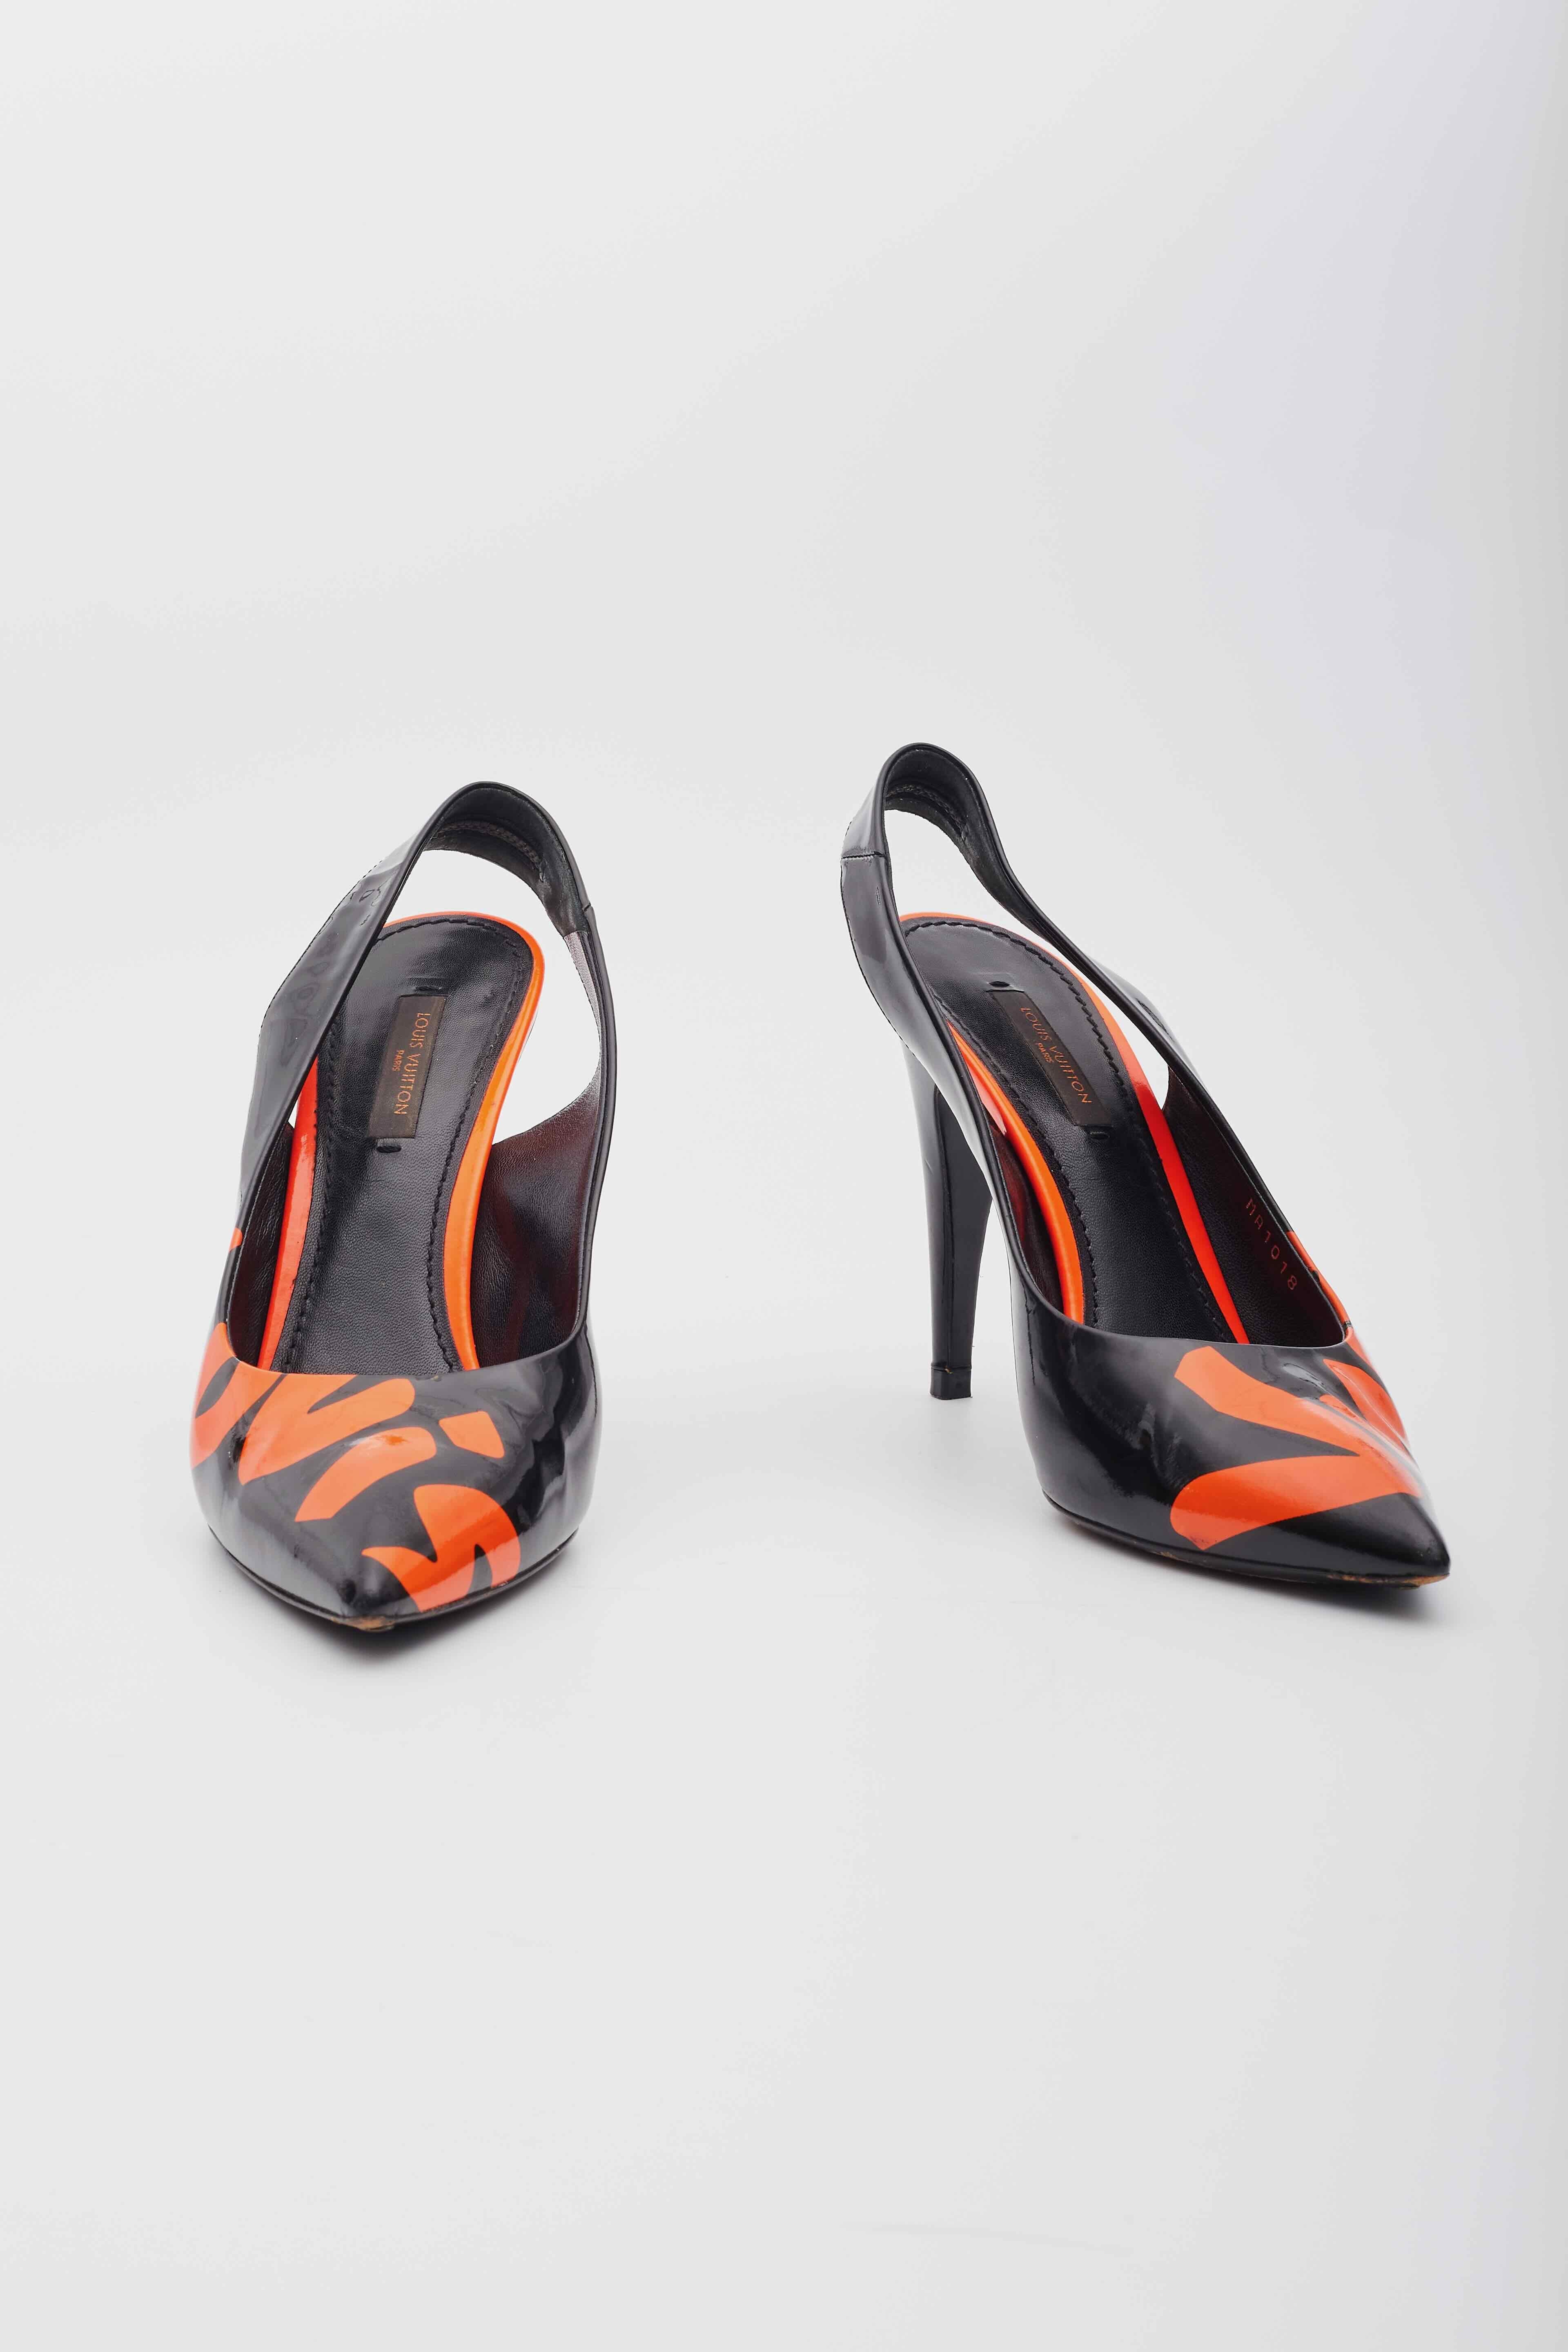 LOUIS VUITTON PATENT LEATHER ORANGE BLACK GRAFFITI SLINGBACK HEELS (EU 38.5)

Black and orange patent leather Louis Vuitton Stephen Sprouse Graffiti pumps with pointed toes and covered heels.

Color: Black with orange Stephen Sprouse Graffiti